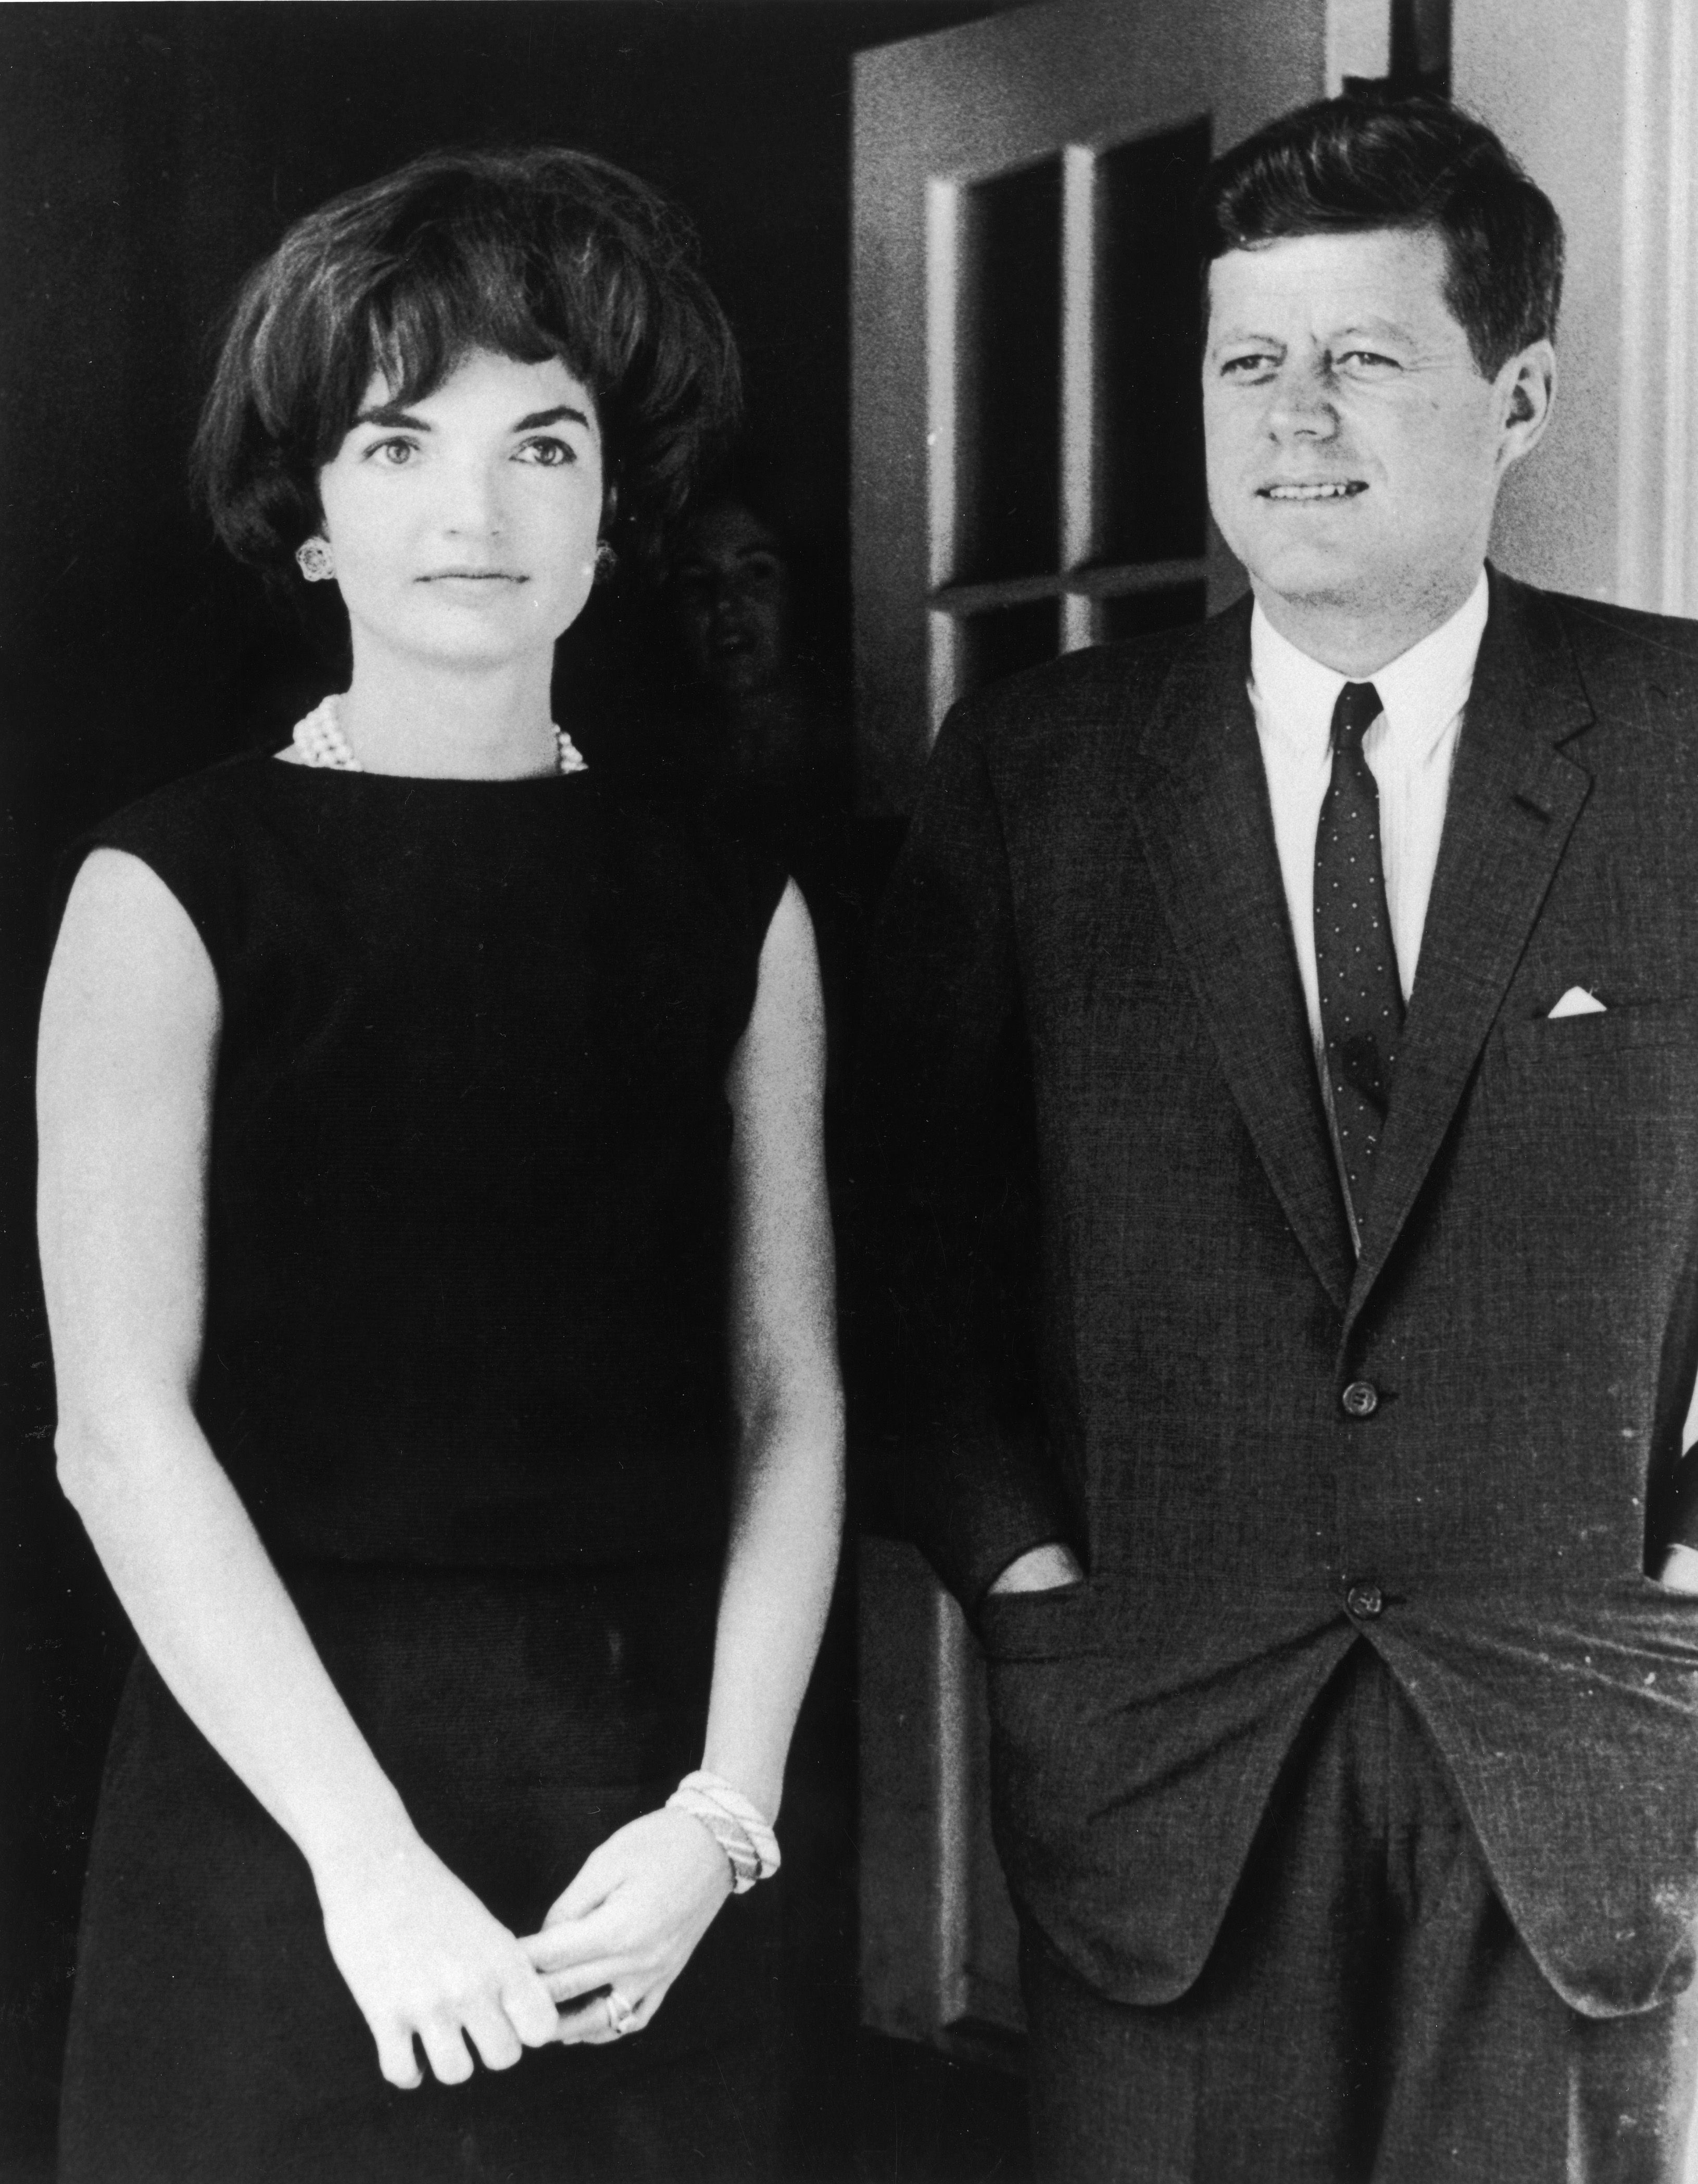  Jacqueline Kennedy stands with her husband, President John F. Kennedy in the door of the White House on January 01, 1960 | Photo: Getty Images